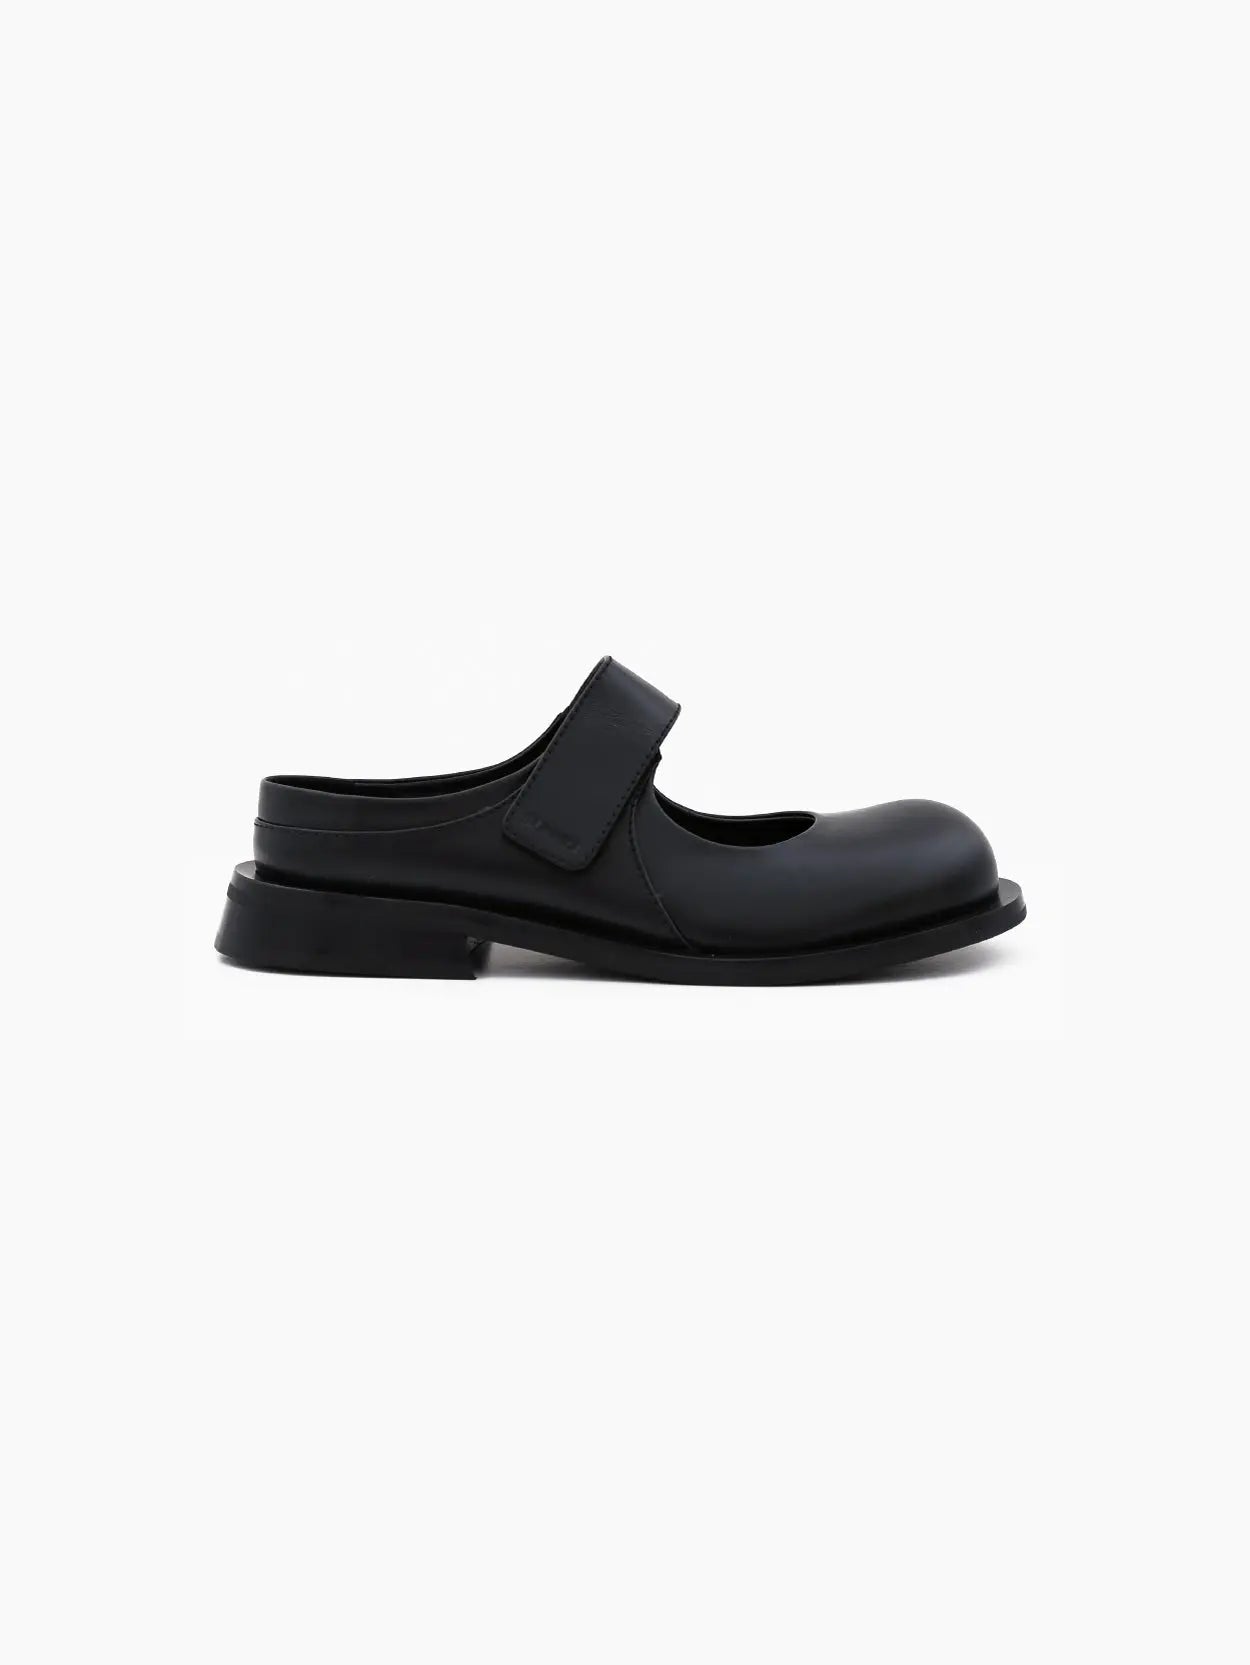 Image of a single black Sunnei Form Marg Black shoe viewed from the side, available at Bassalstore in Barcelona. The shoe features a rounded toe, a thick strap across the top with a velcro closure, and a chunky sole. The background is plain white.